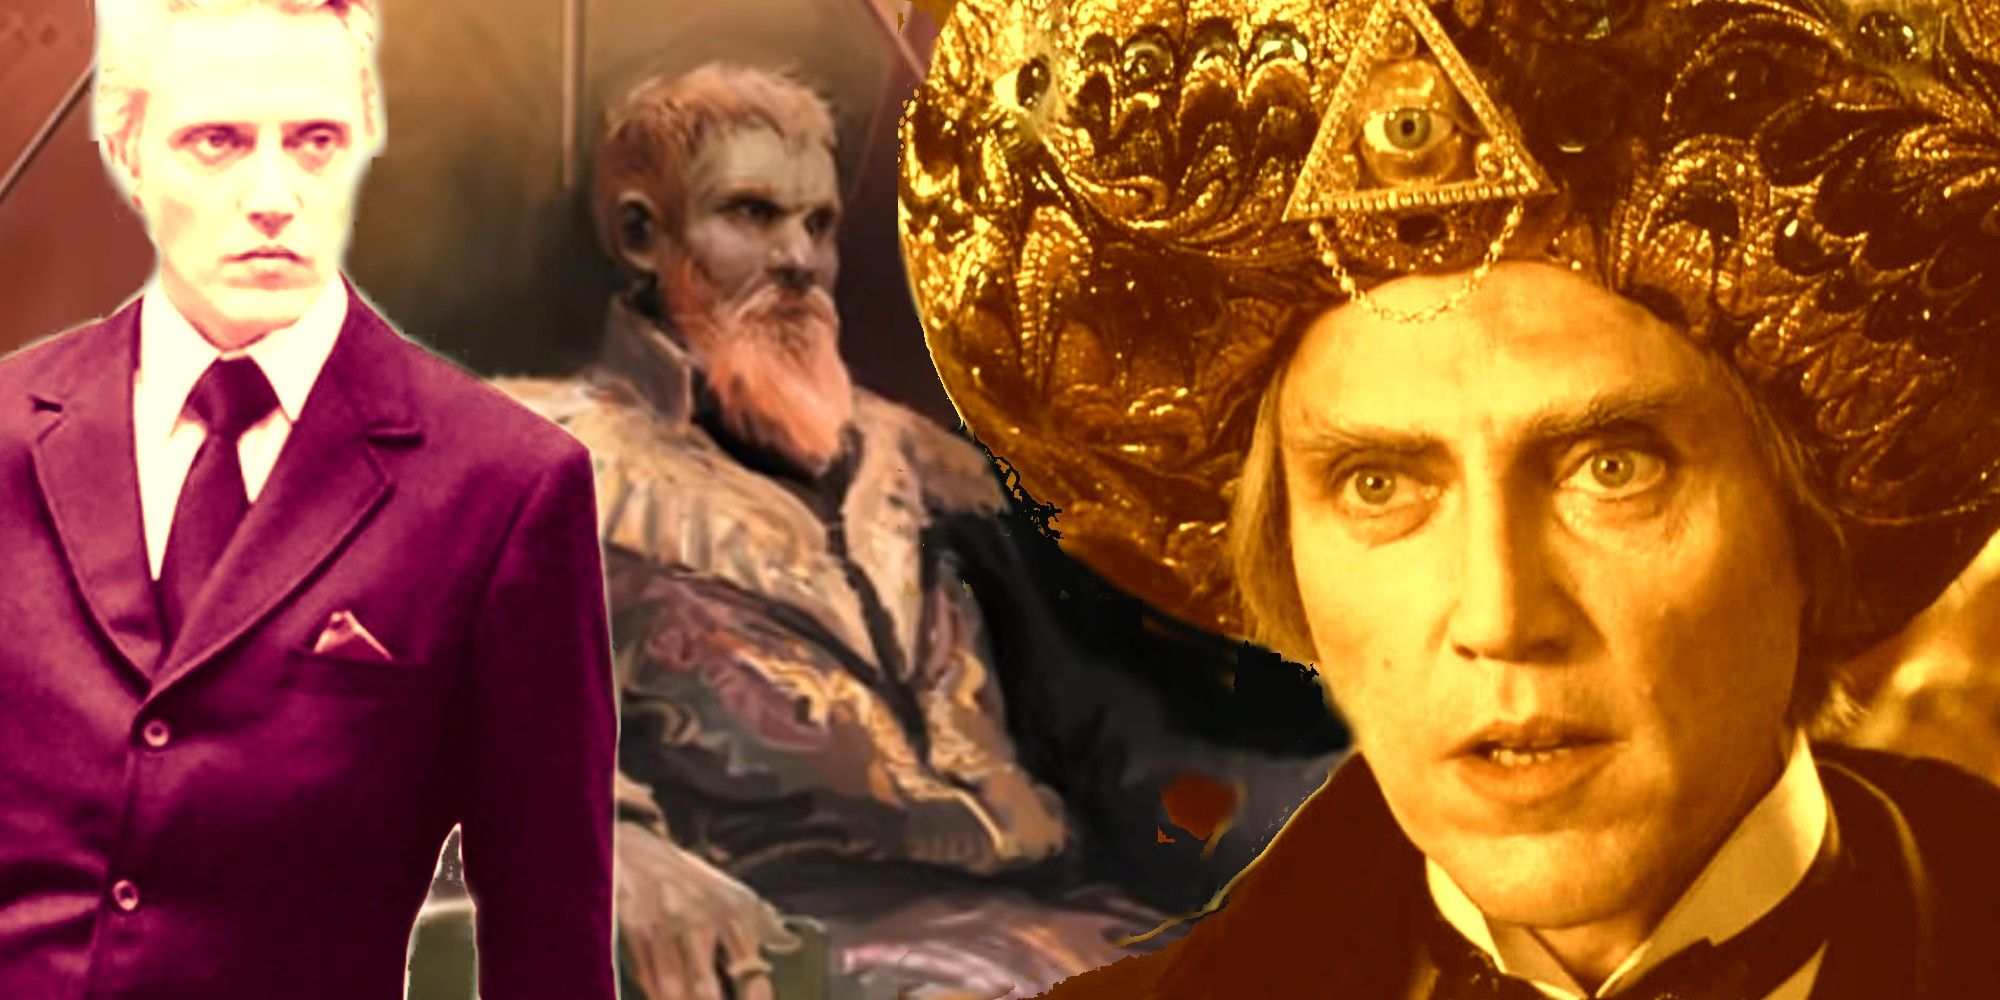 Collage of Christopher Walken as Max Zorin in View to a Kill and Max Shreck in Batman Returns with an illustration of Emperor Shaddam from Dune